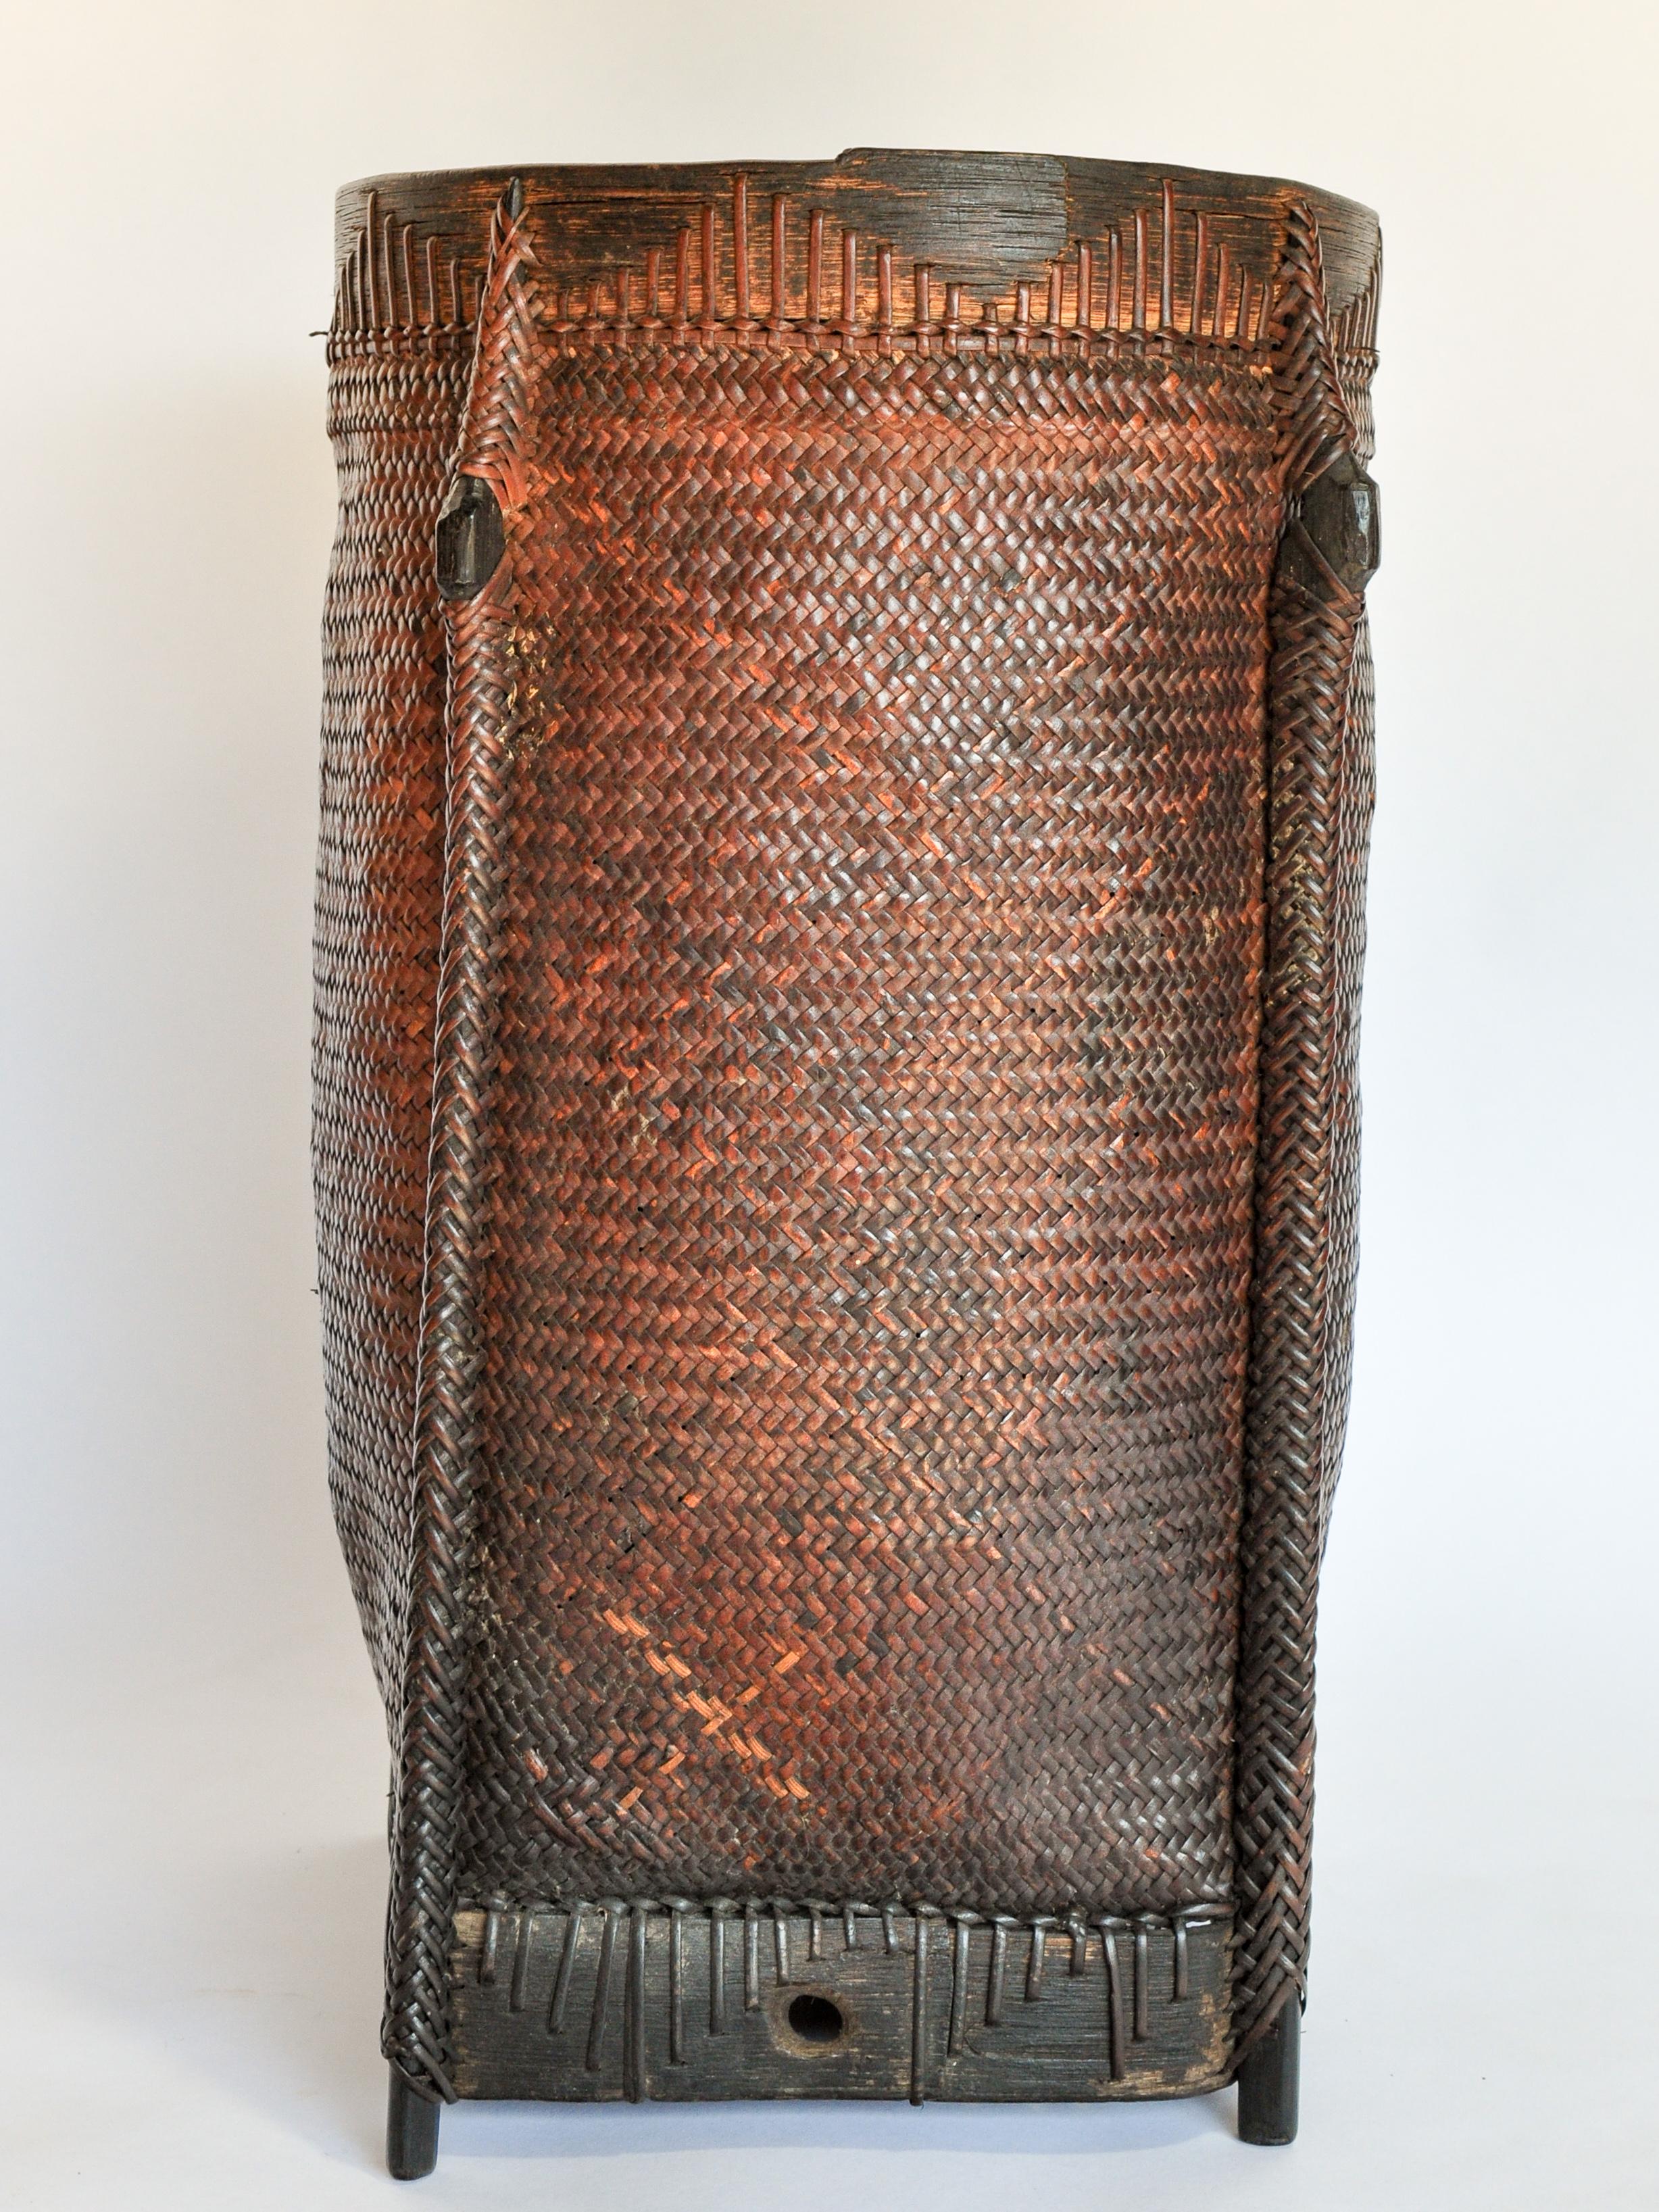 Hand-Crafted Tribal Carrying and Storage Basket from Borneo, Mid-20th Century